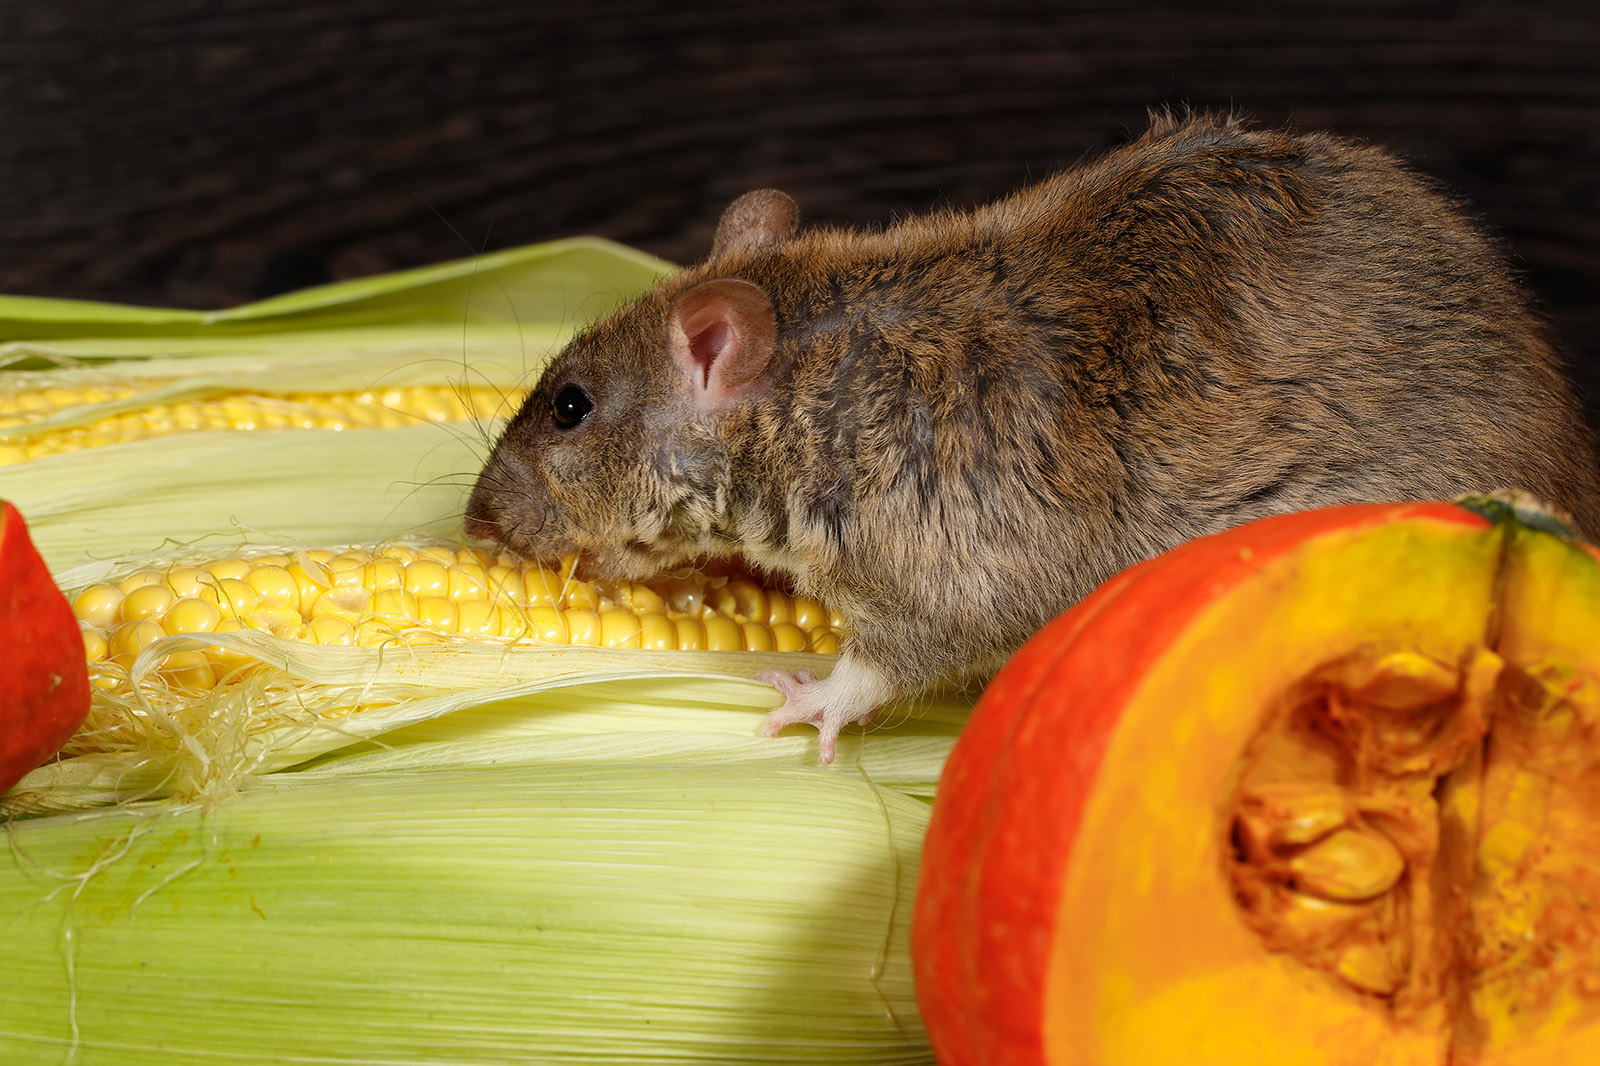 Food Sources That Attract Mice and Rats to Your Home